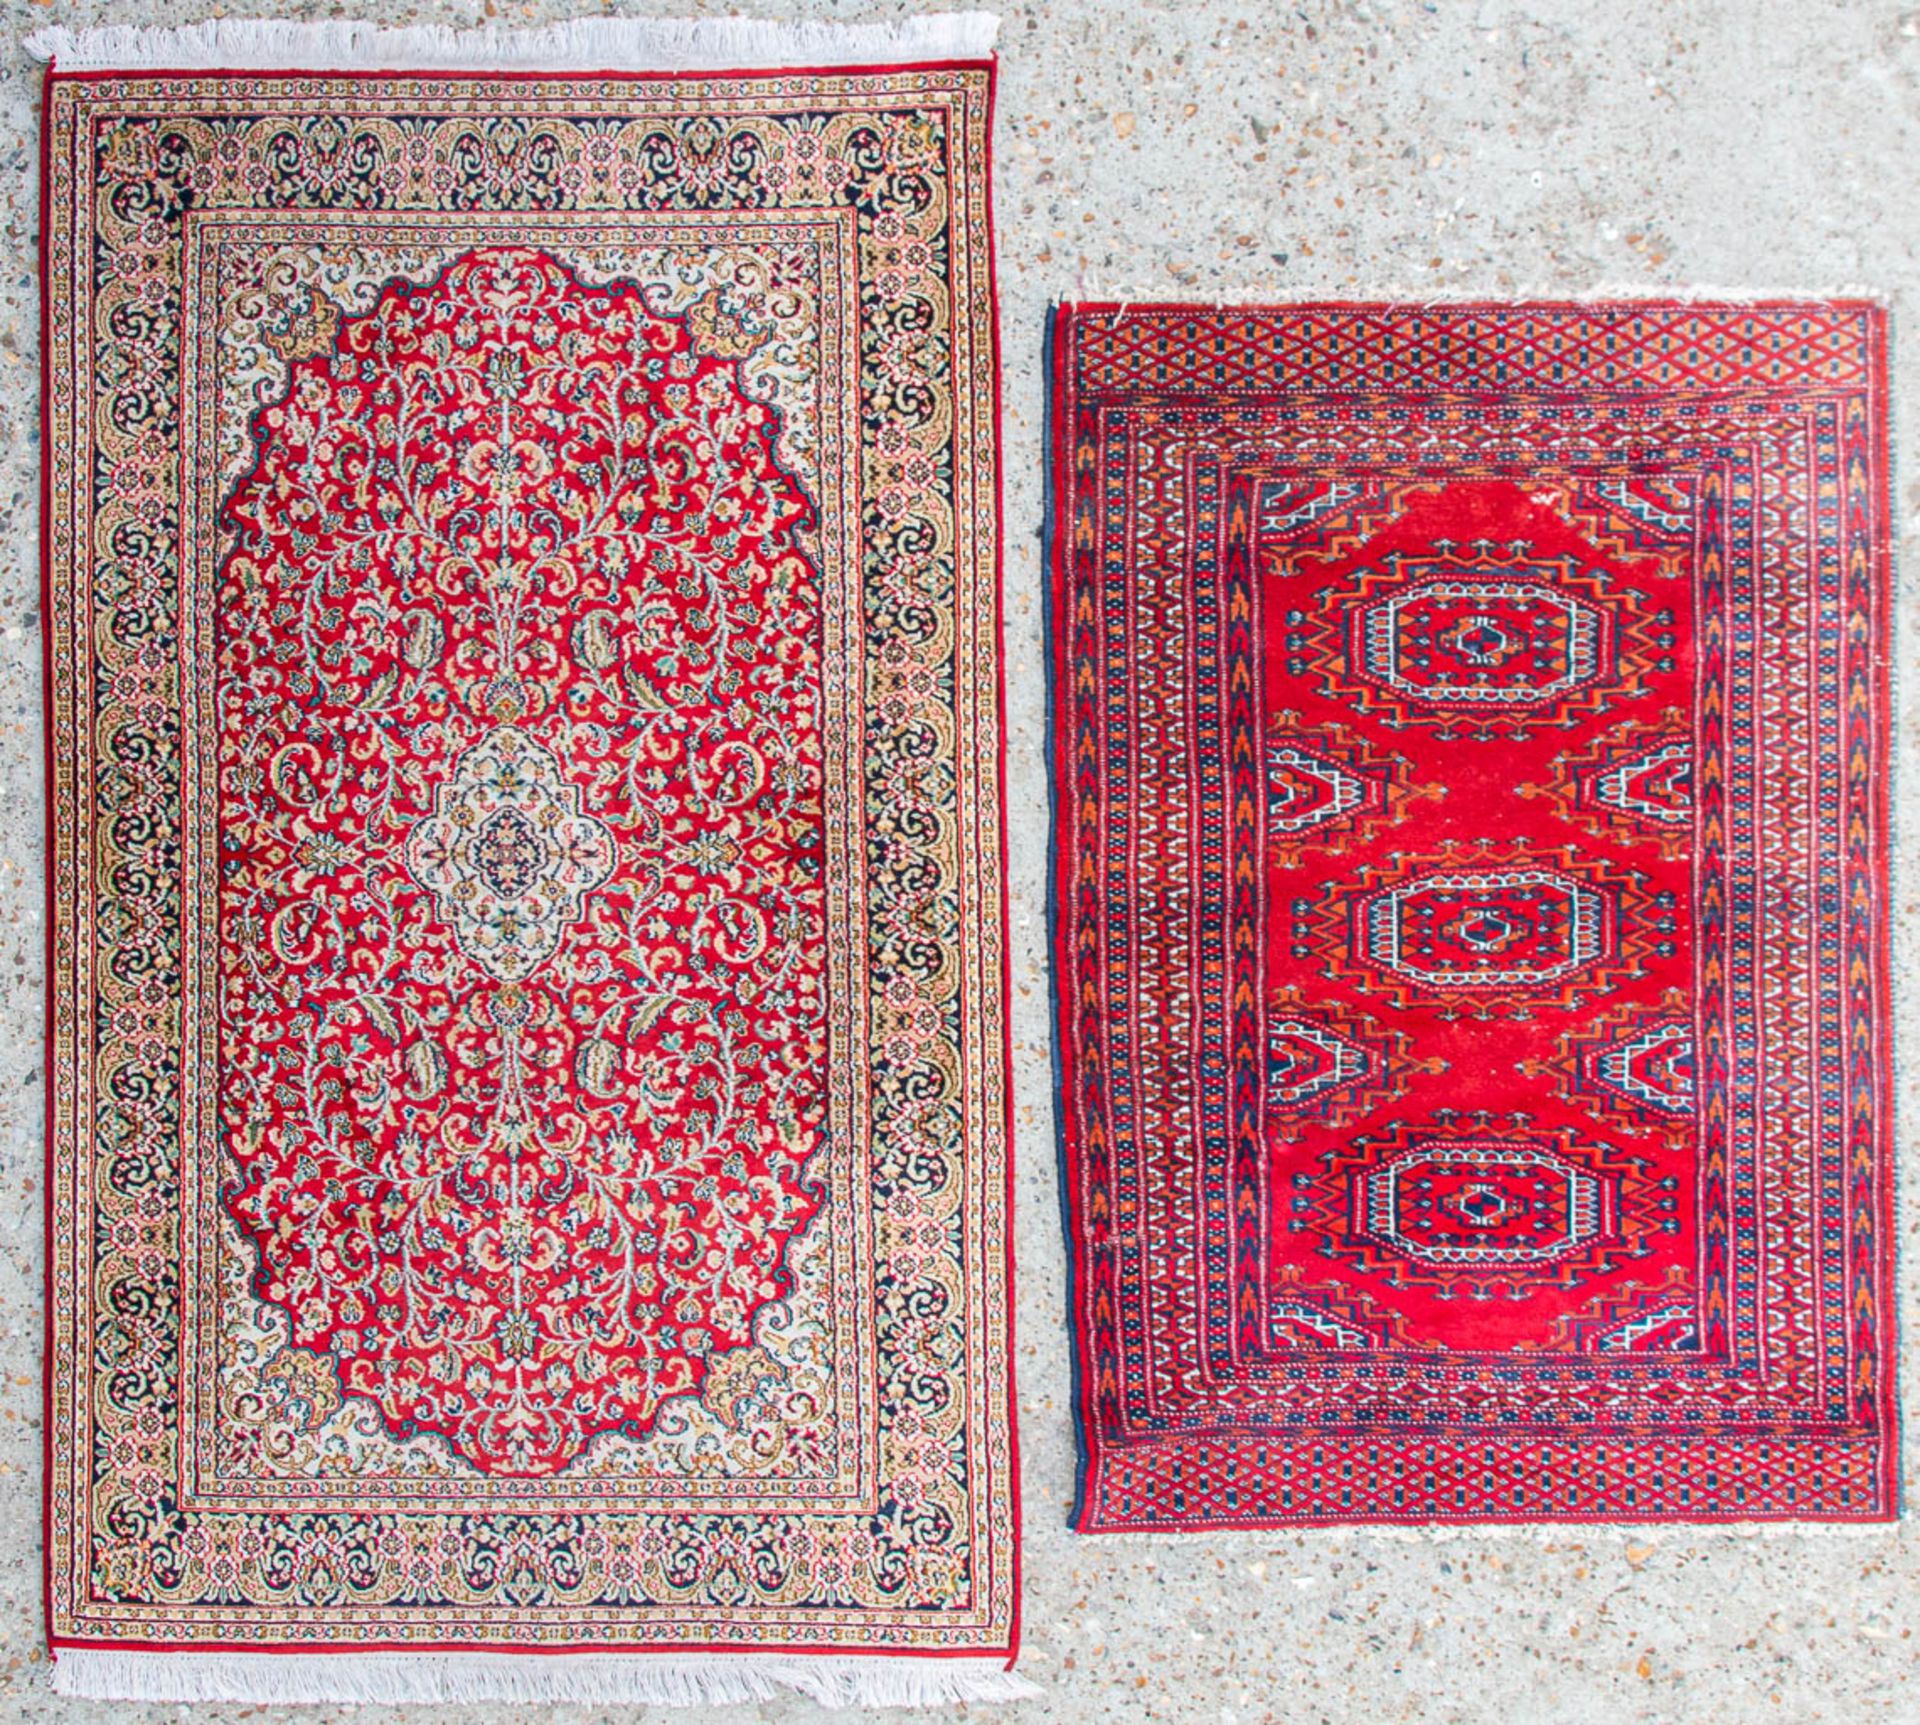 A collection of 2 Oriental carpets, Kashmir and Turkaman /Bokhara. (91 x 153,5 cm)